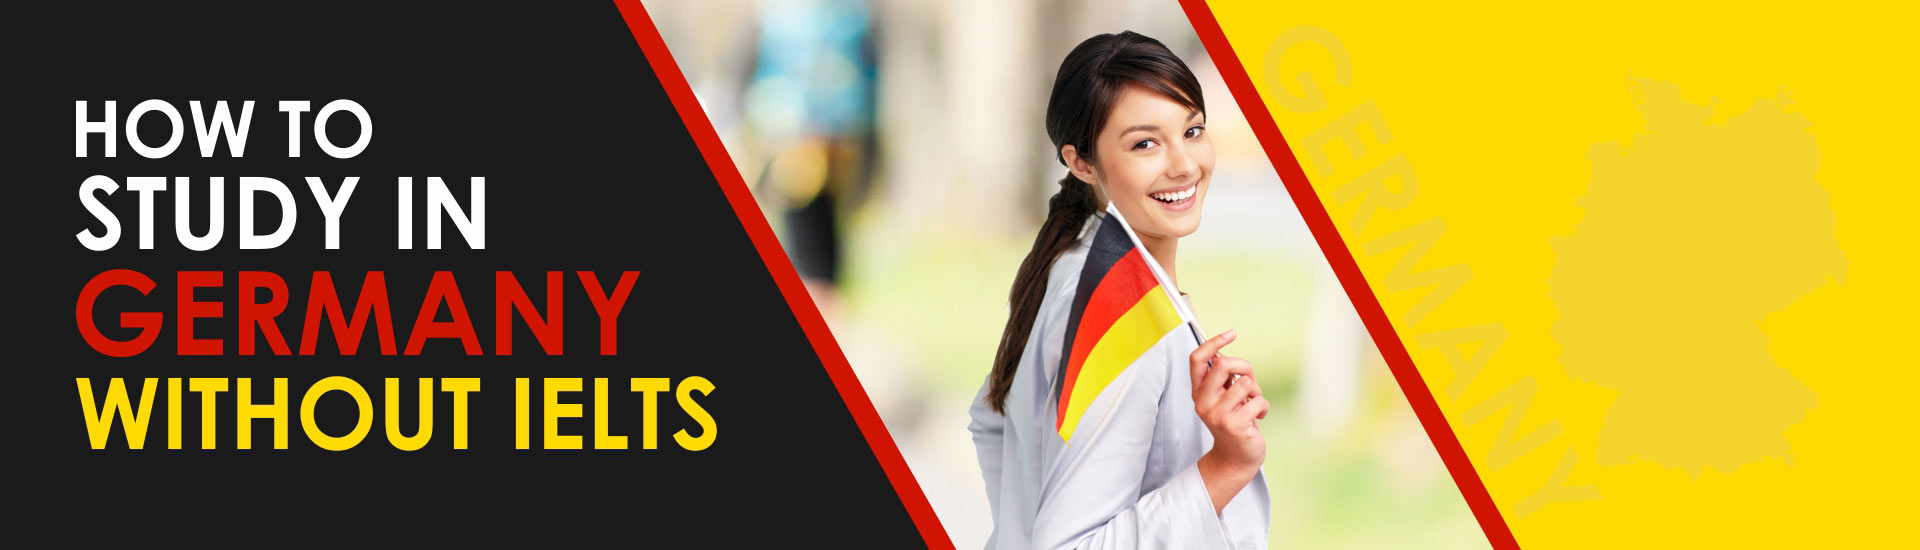 How to Study in Germany Without IELTS?